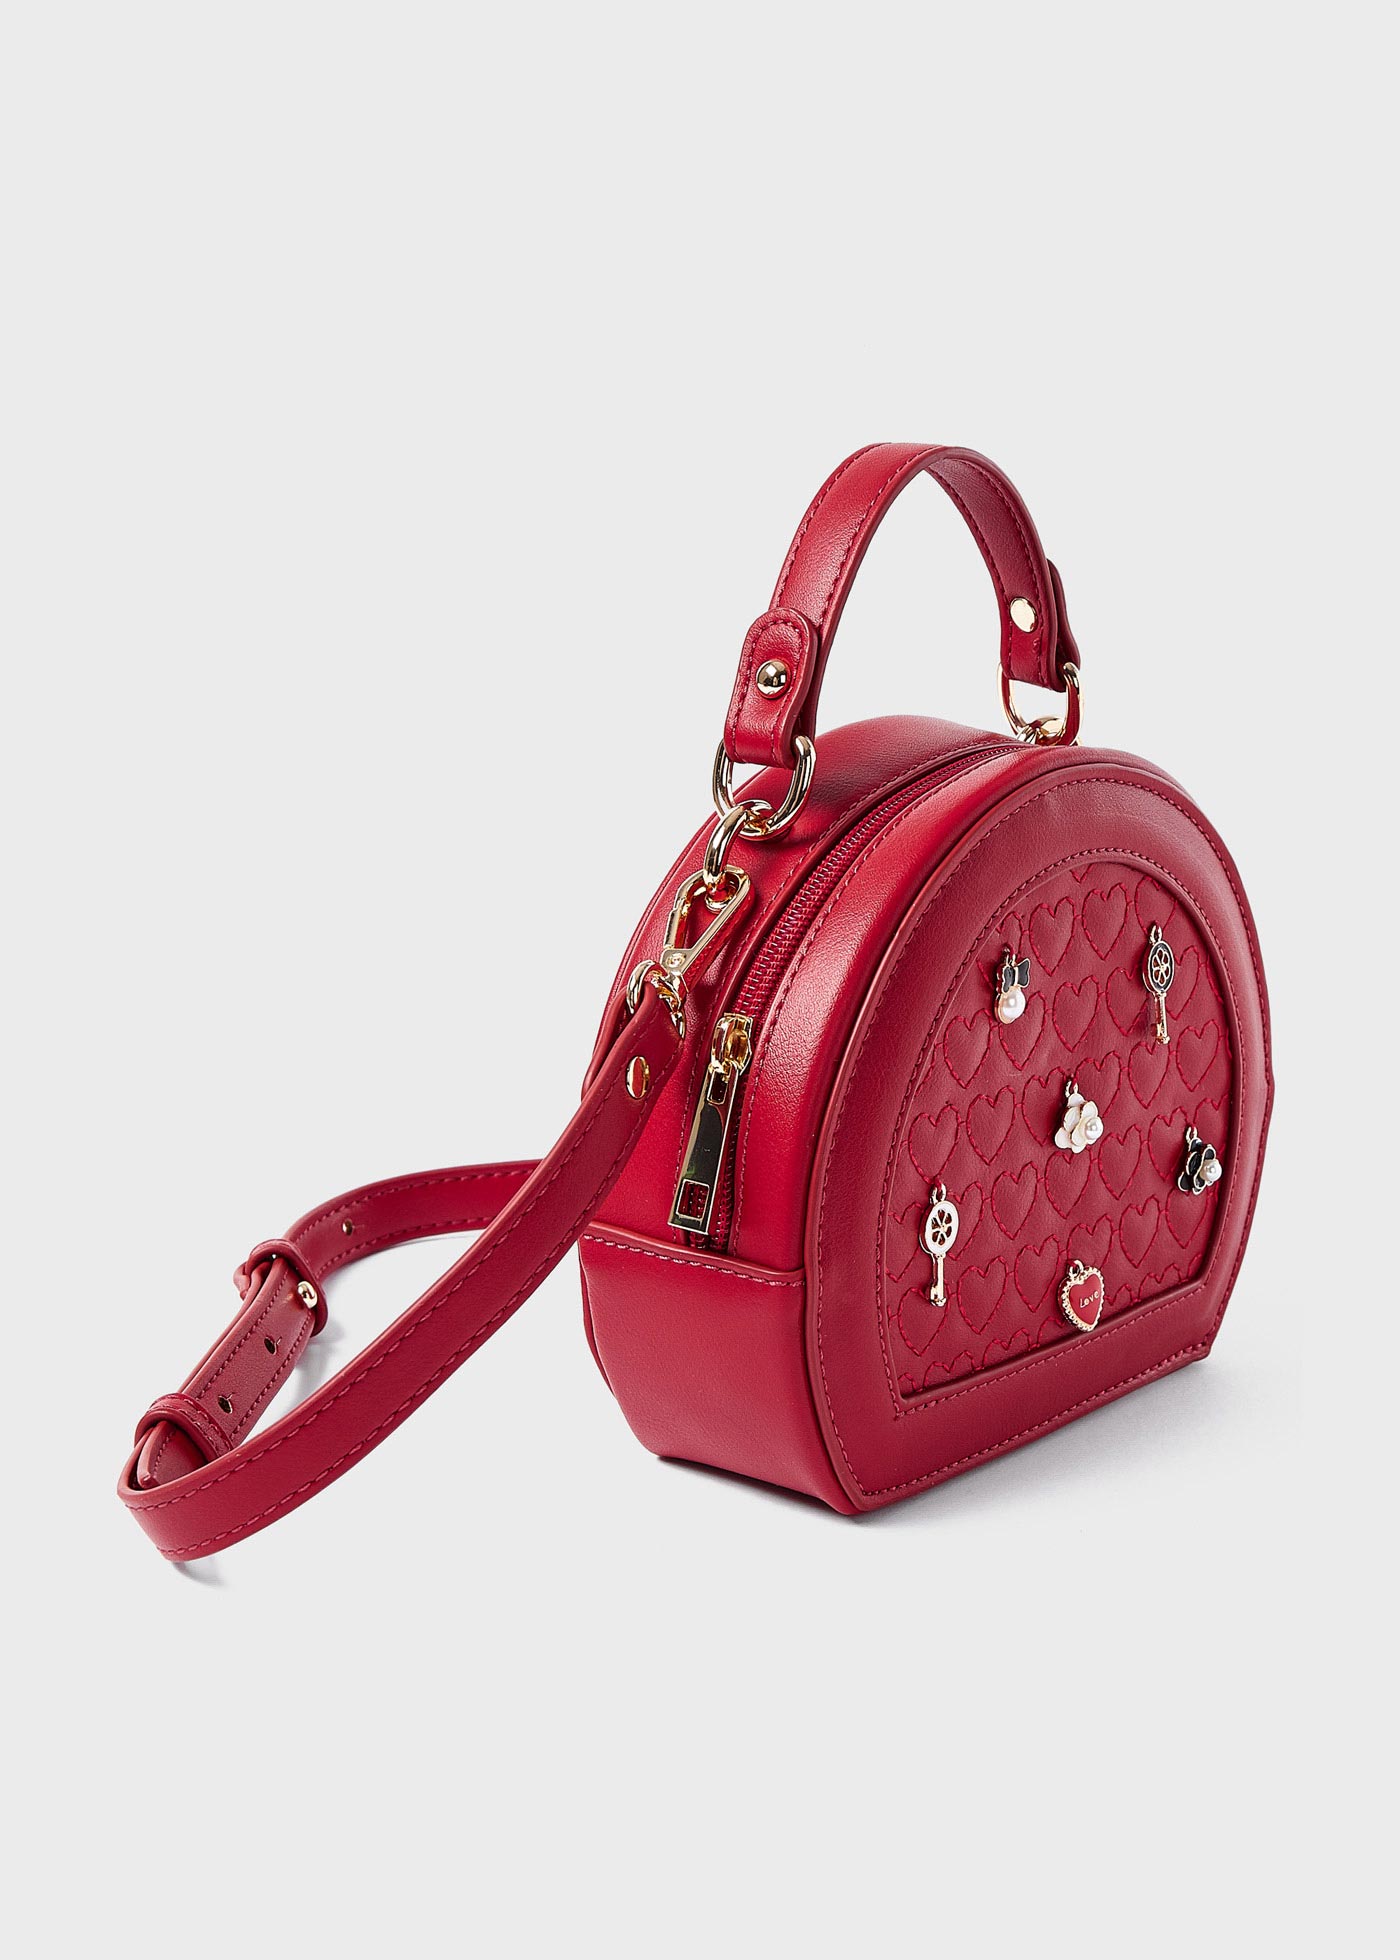 Truly Quilted Heart Handbag